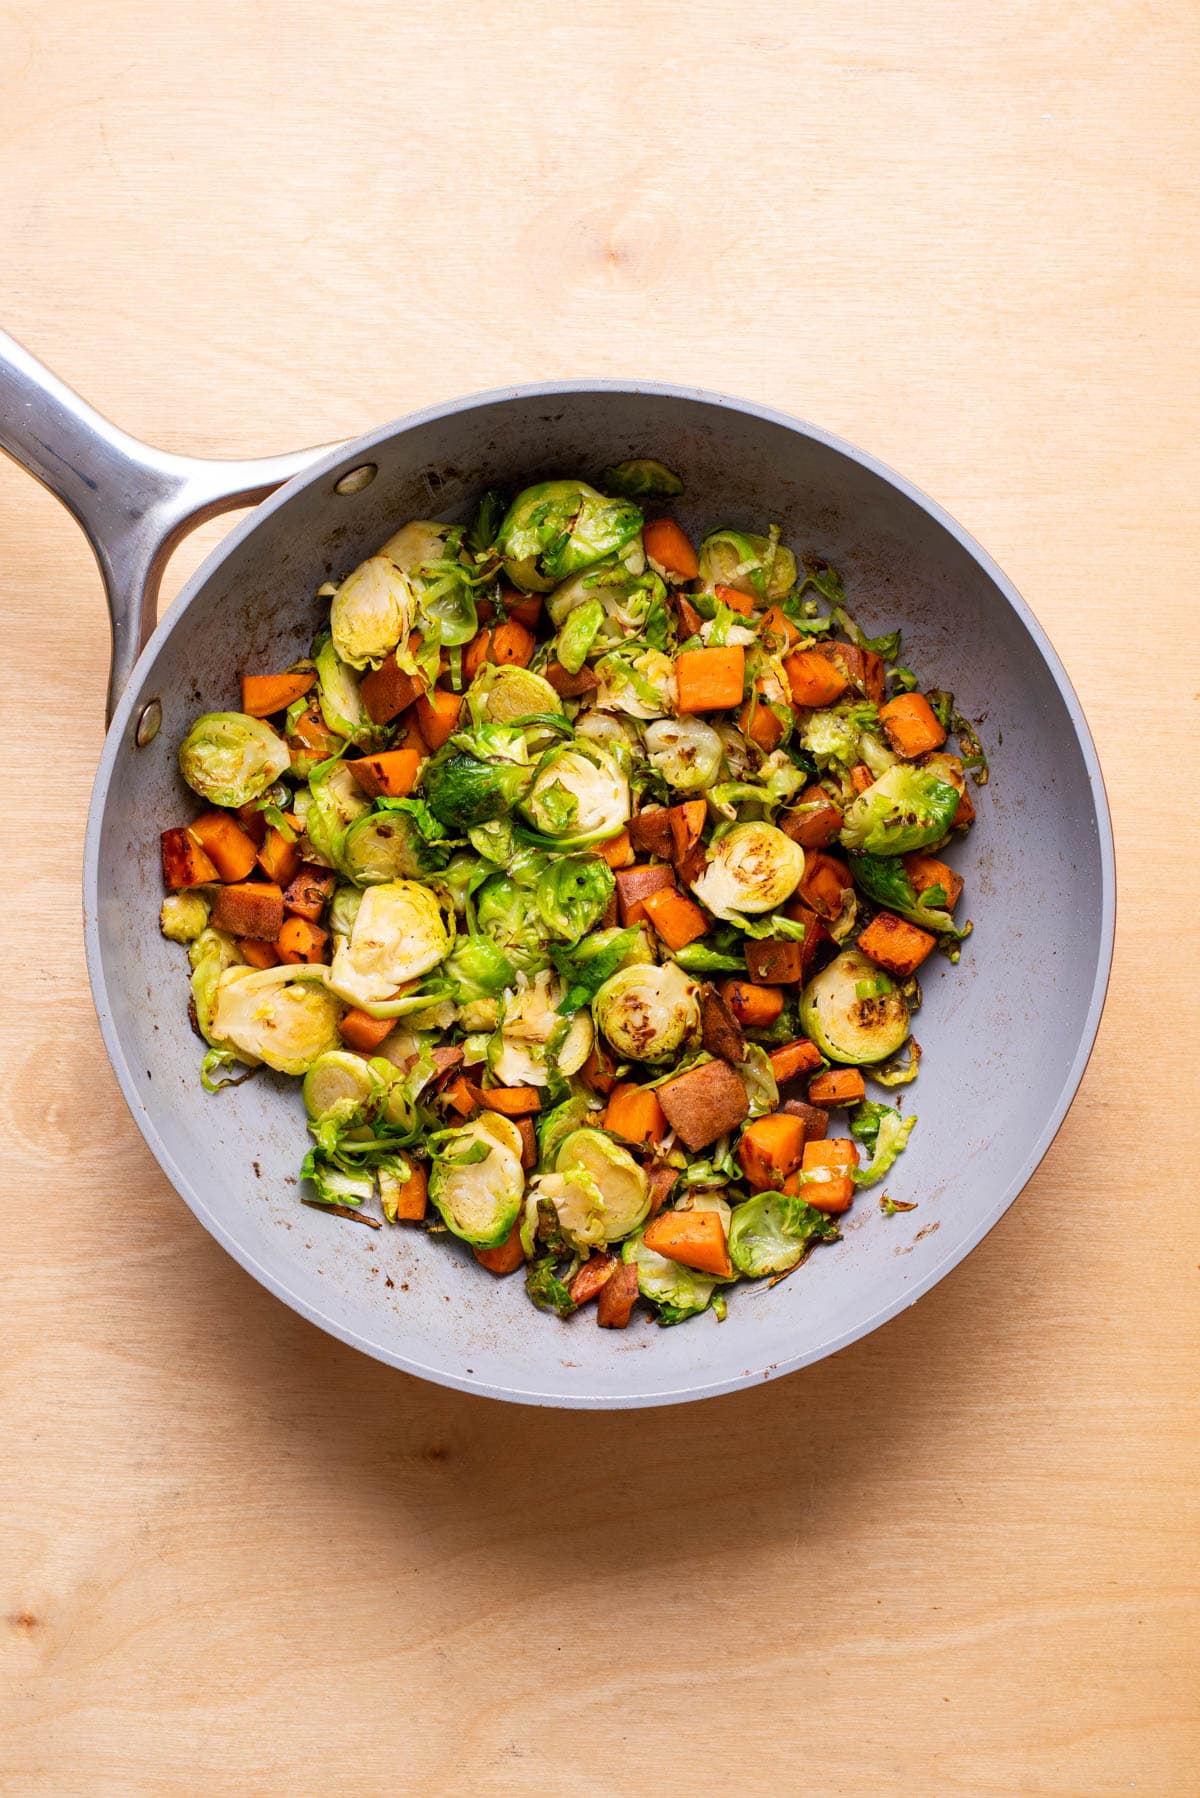 Diced sweet potatoes and shredded brussels sprouts in a skillet.